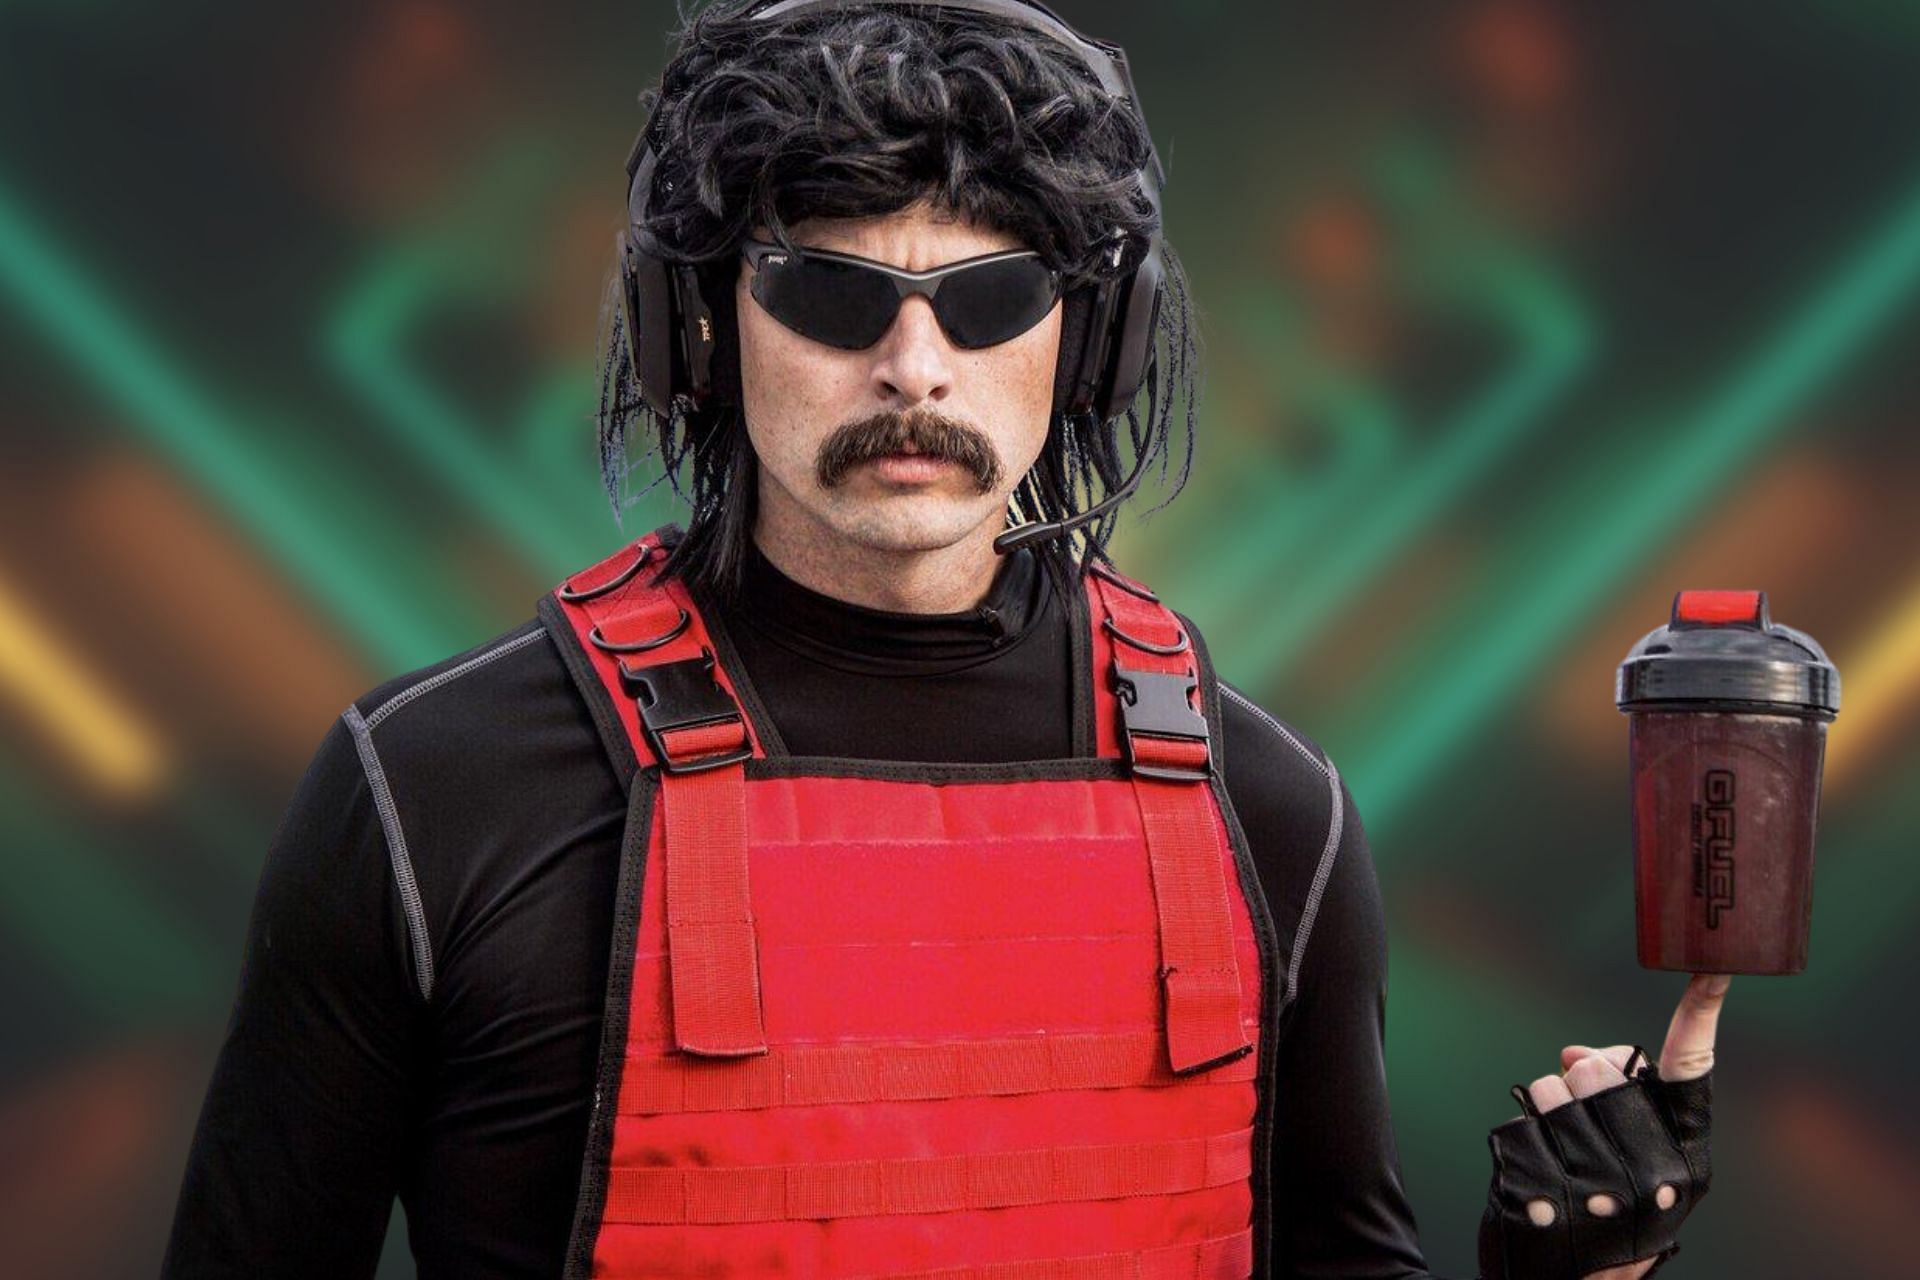 How tall is Dr Disrespect? Understanding the iconic streamer’s height, age and other personal details